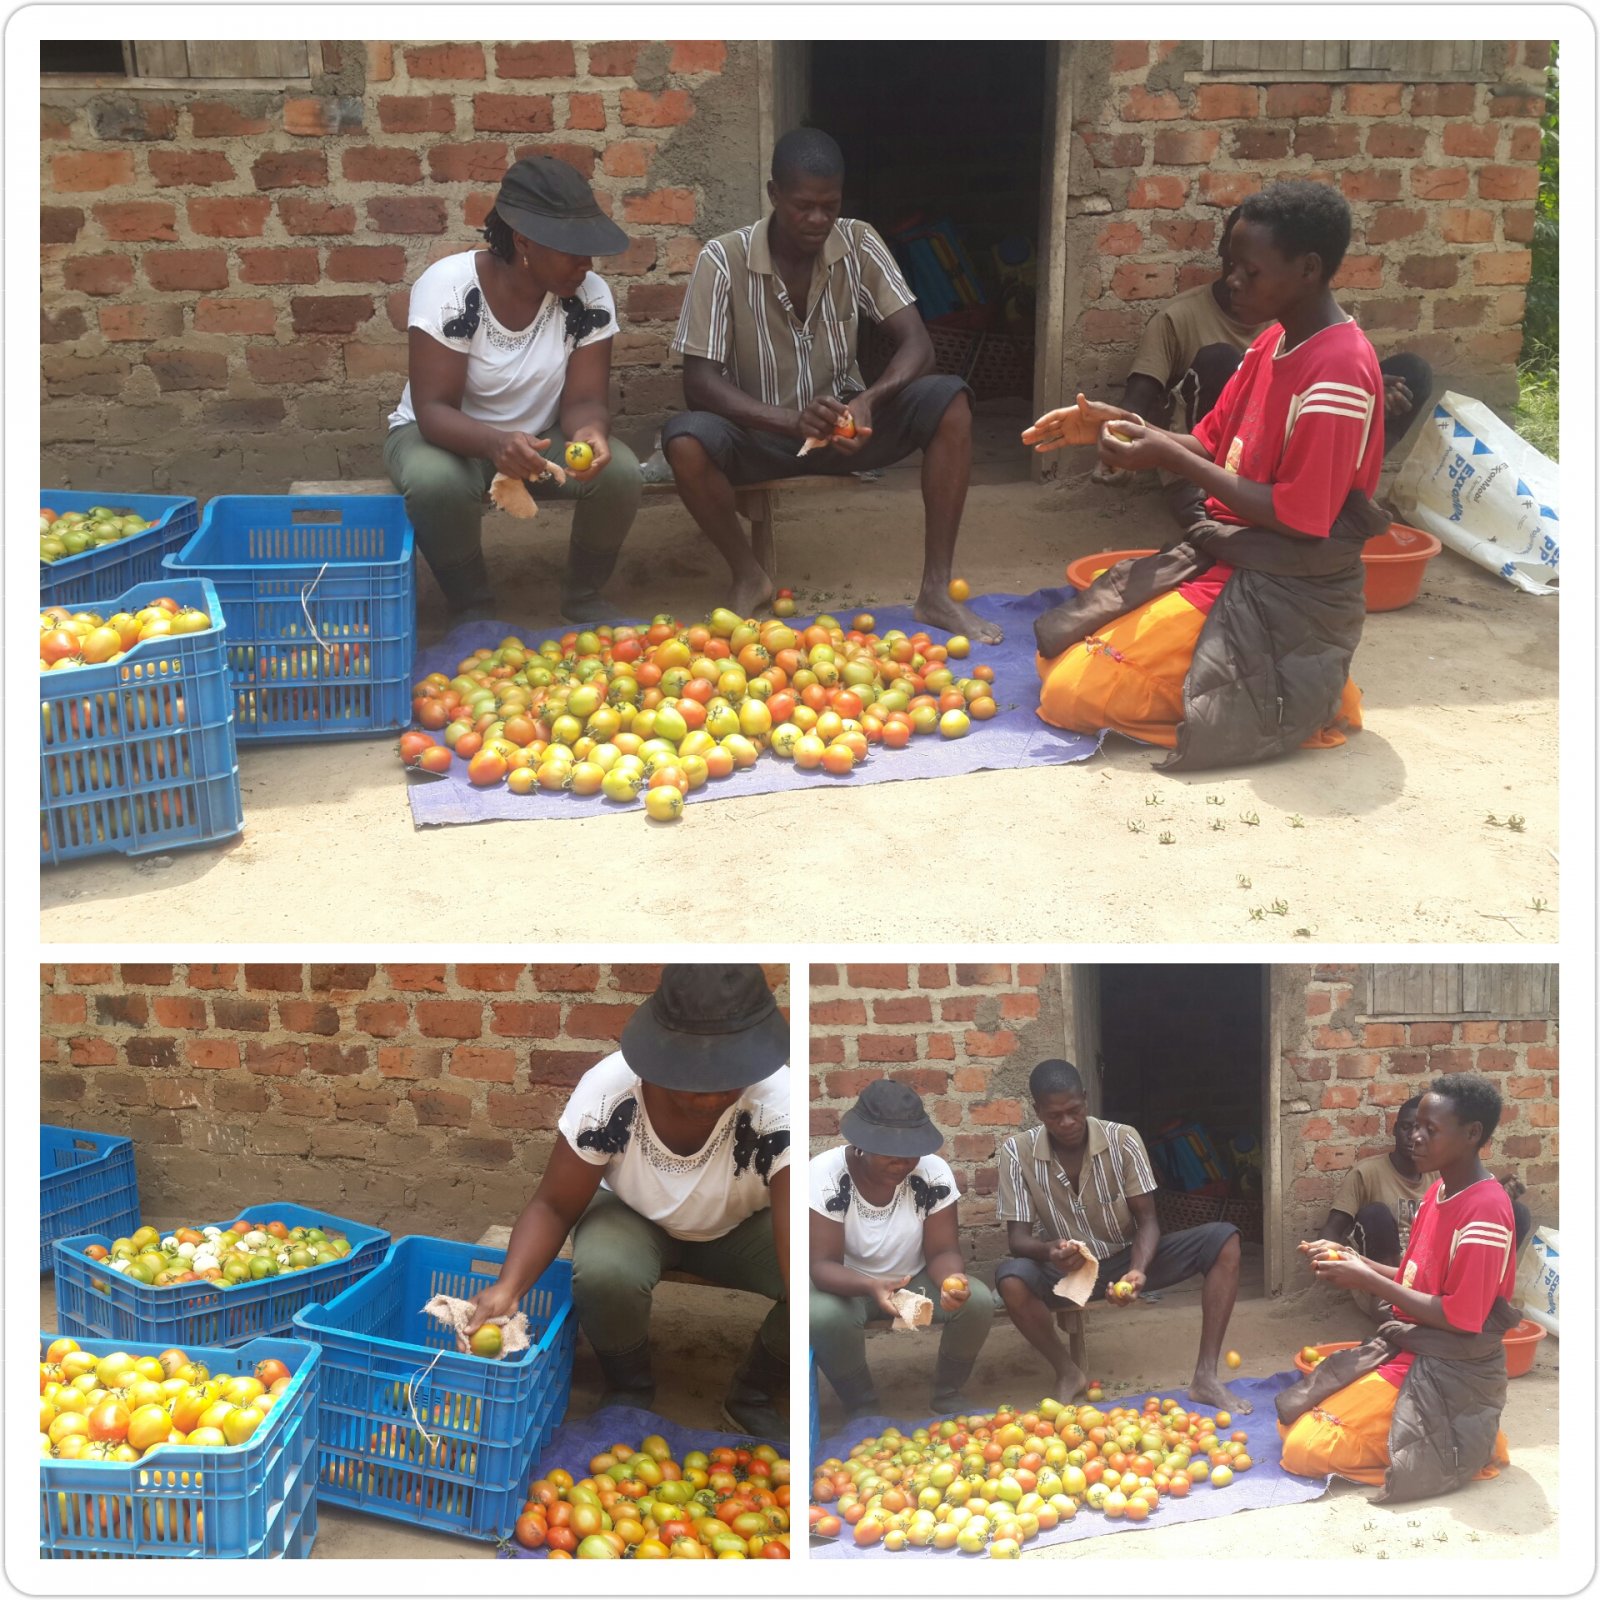 I was sorting the good tomatoes for the market together with my workers as we discussed our targets for the next week